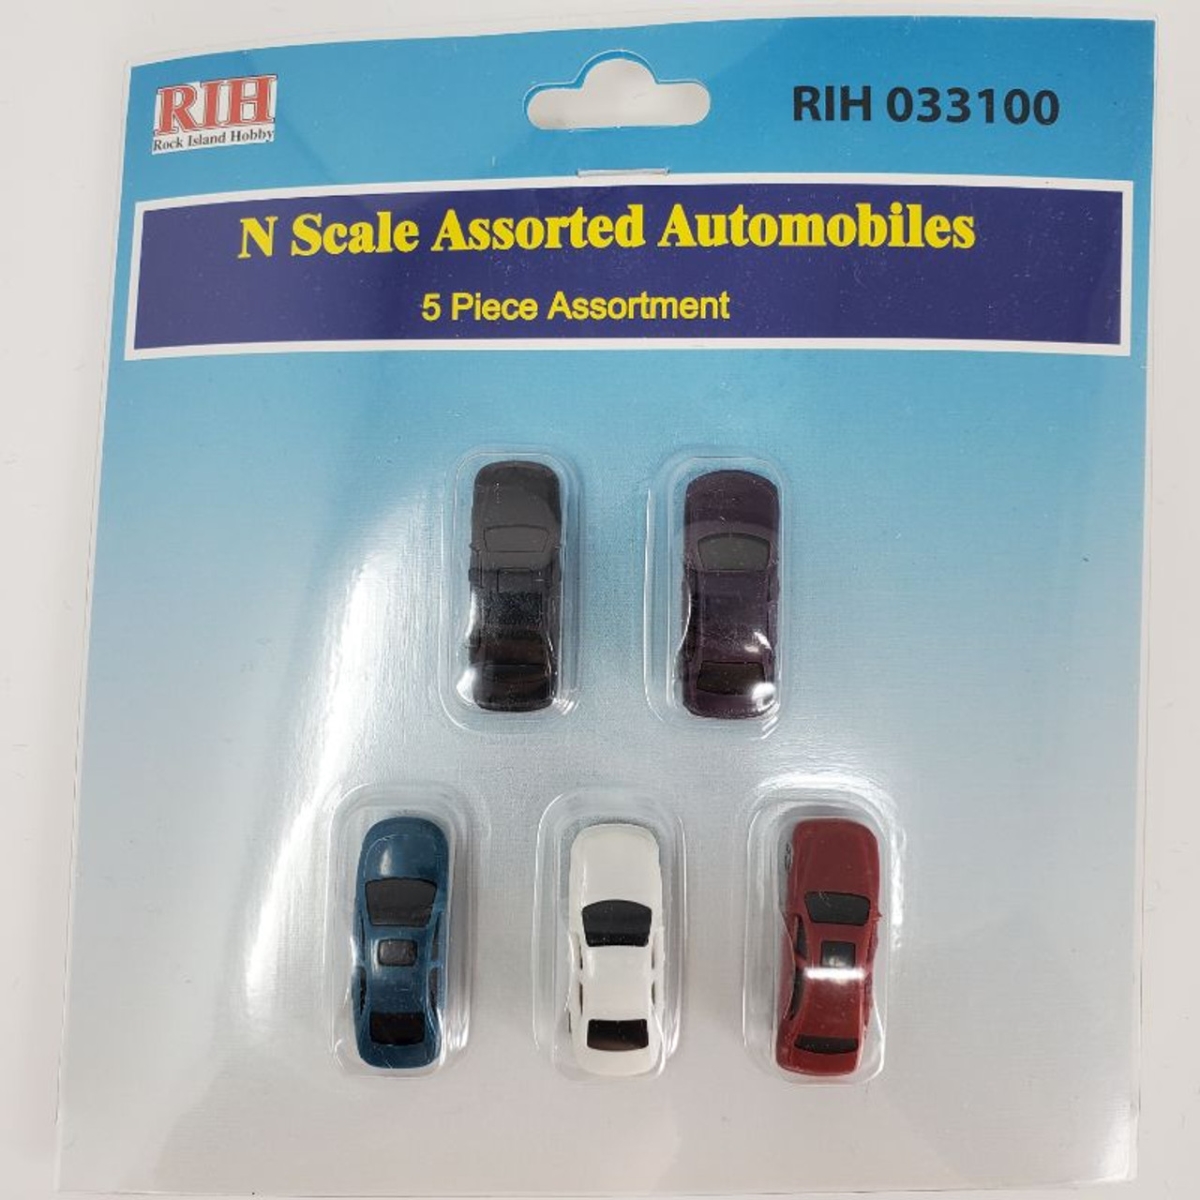 Picture of Rock Island Hobby RIH033100 N Scale Autos - 5 Piece